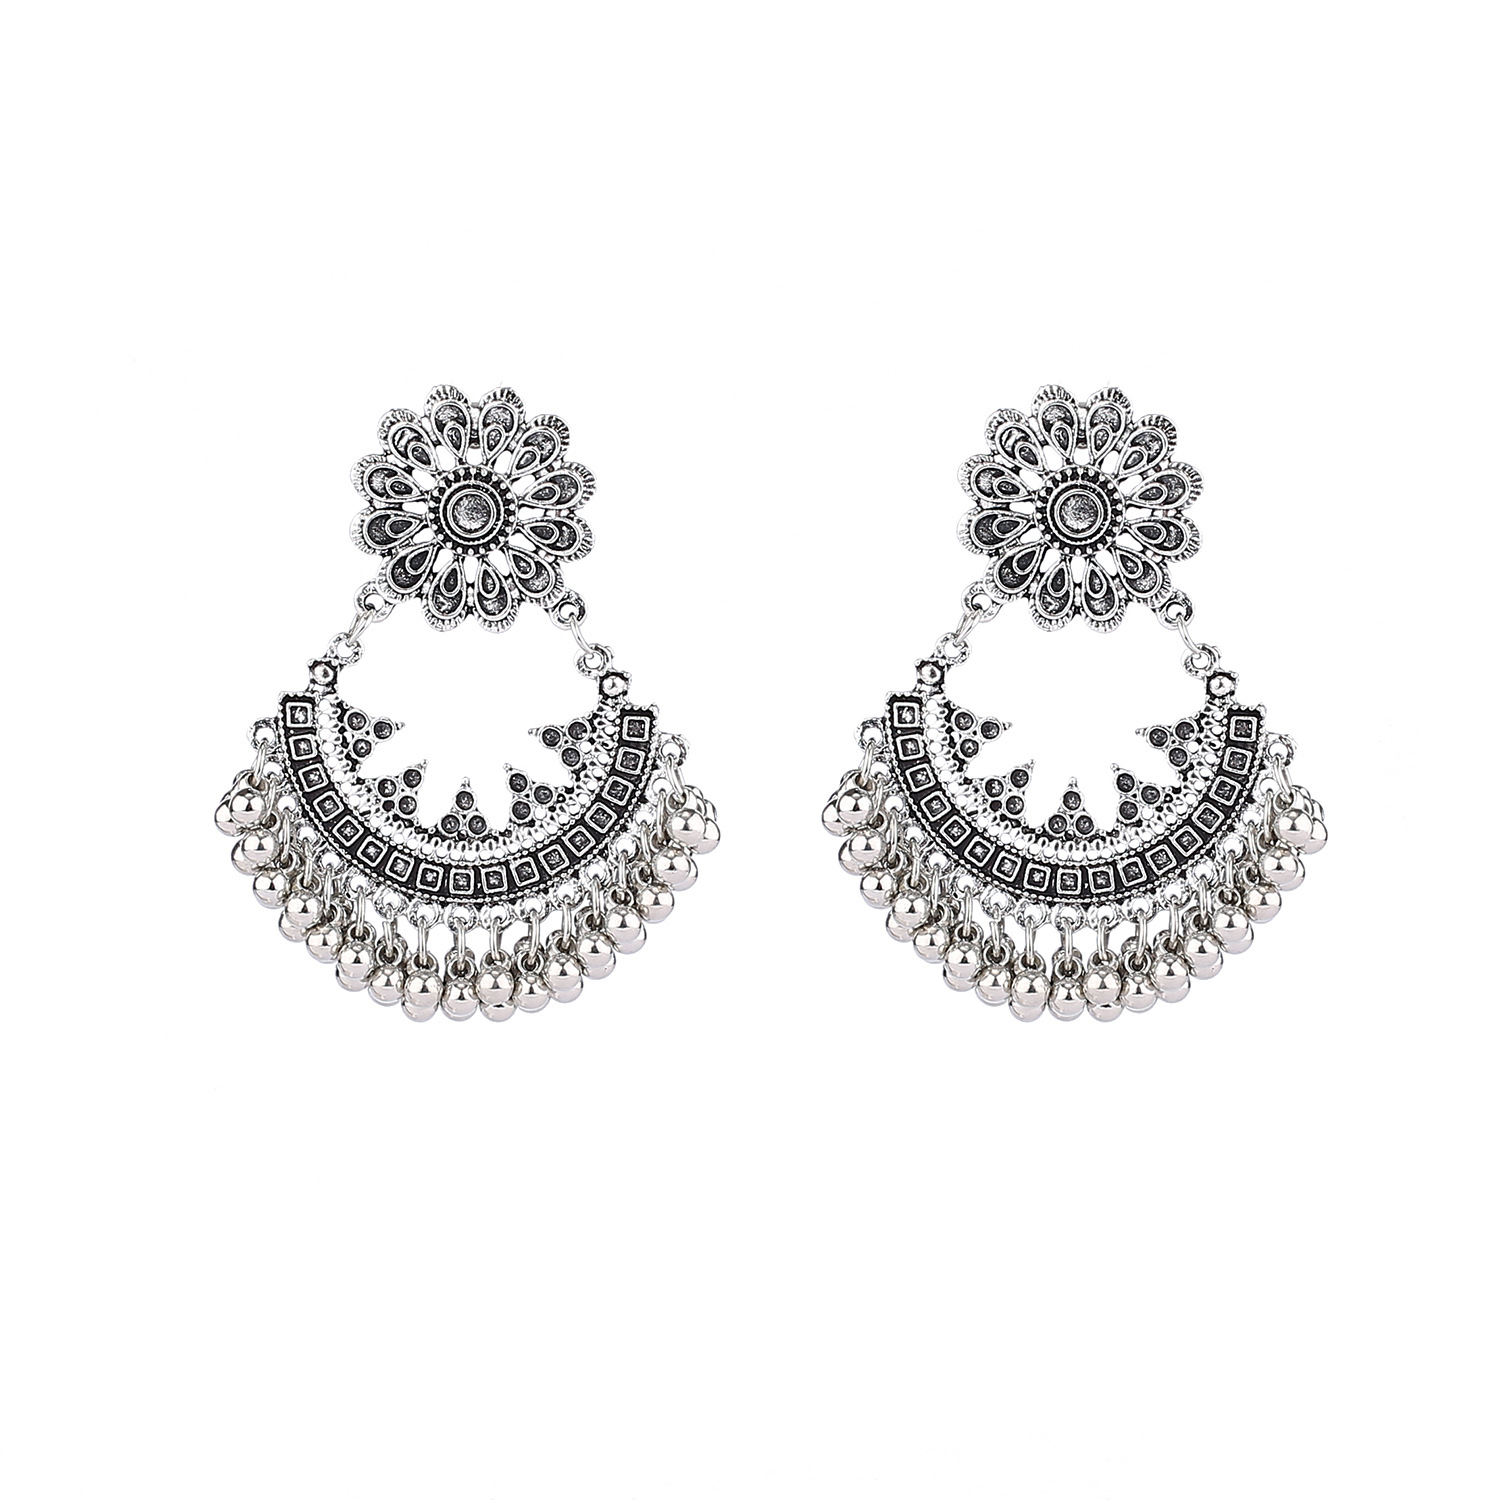 Exaggerated Palace Style Alloy Fan-shaped Earrings Jewelry Niche Design Sense Travel Photo Gift Earrings